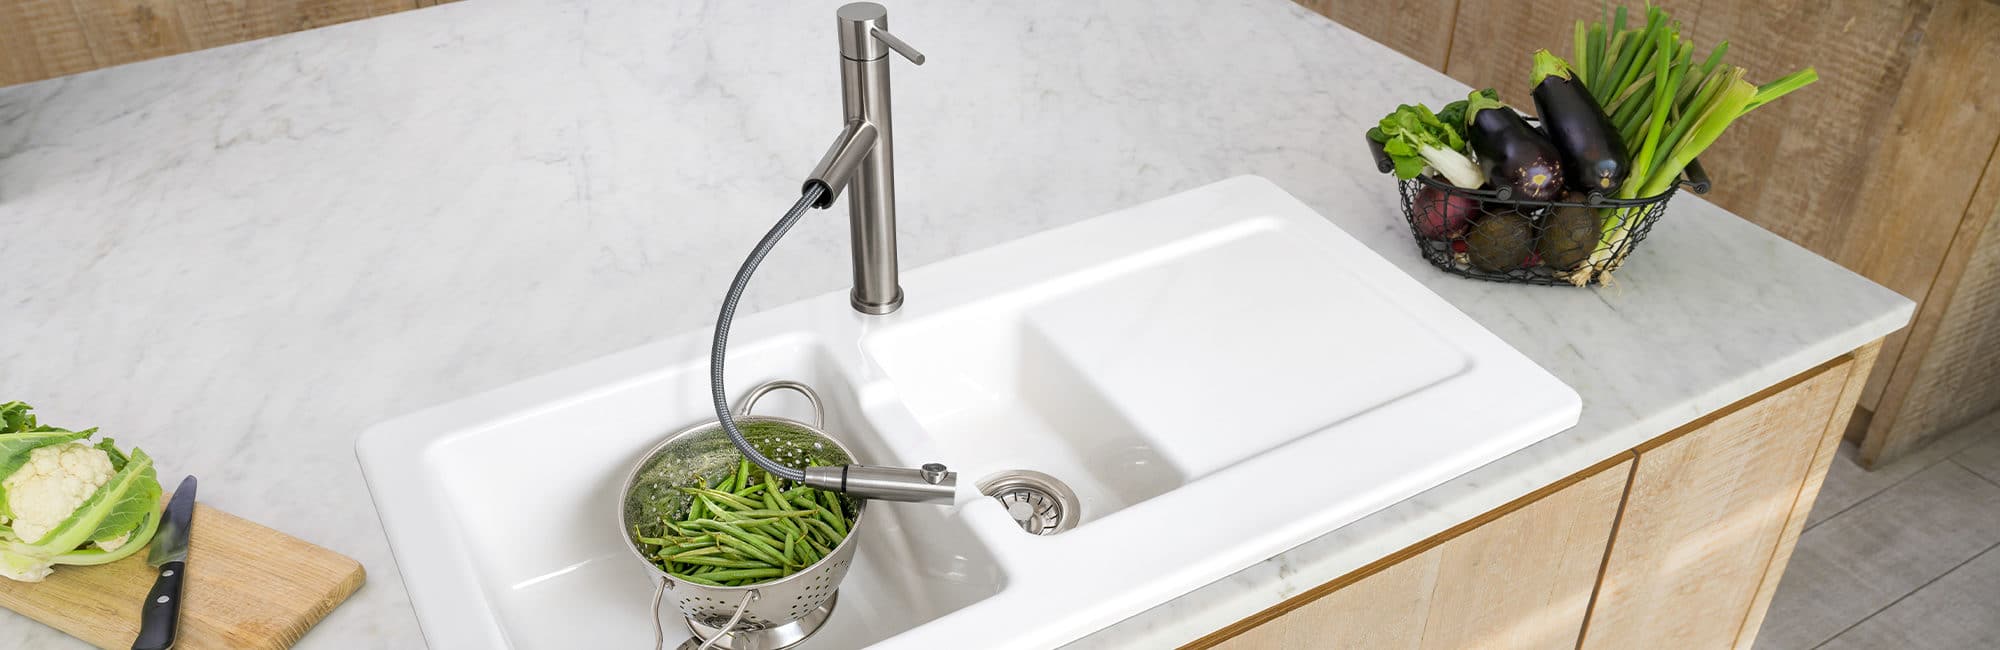 Ceramic Sink with Stainless Steel Pull-out Spray Tap